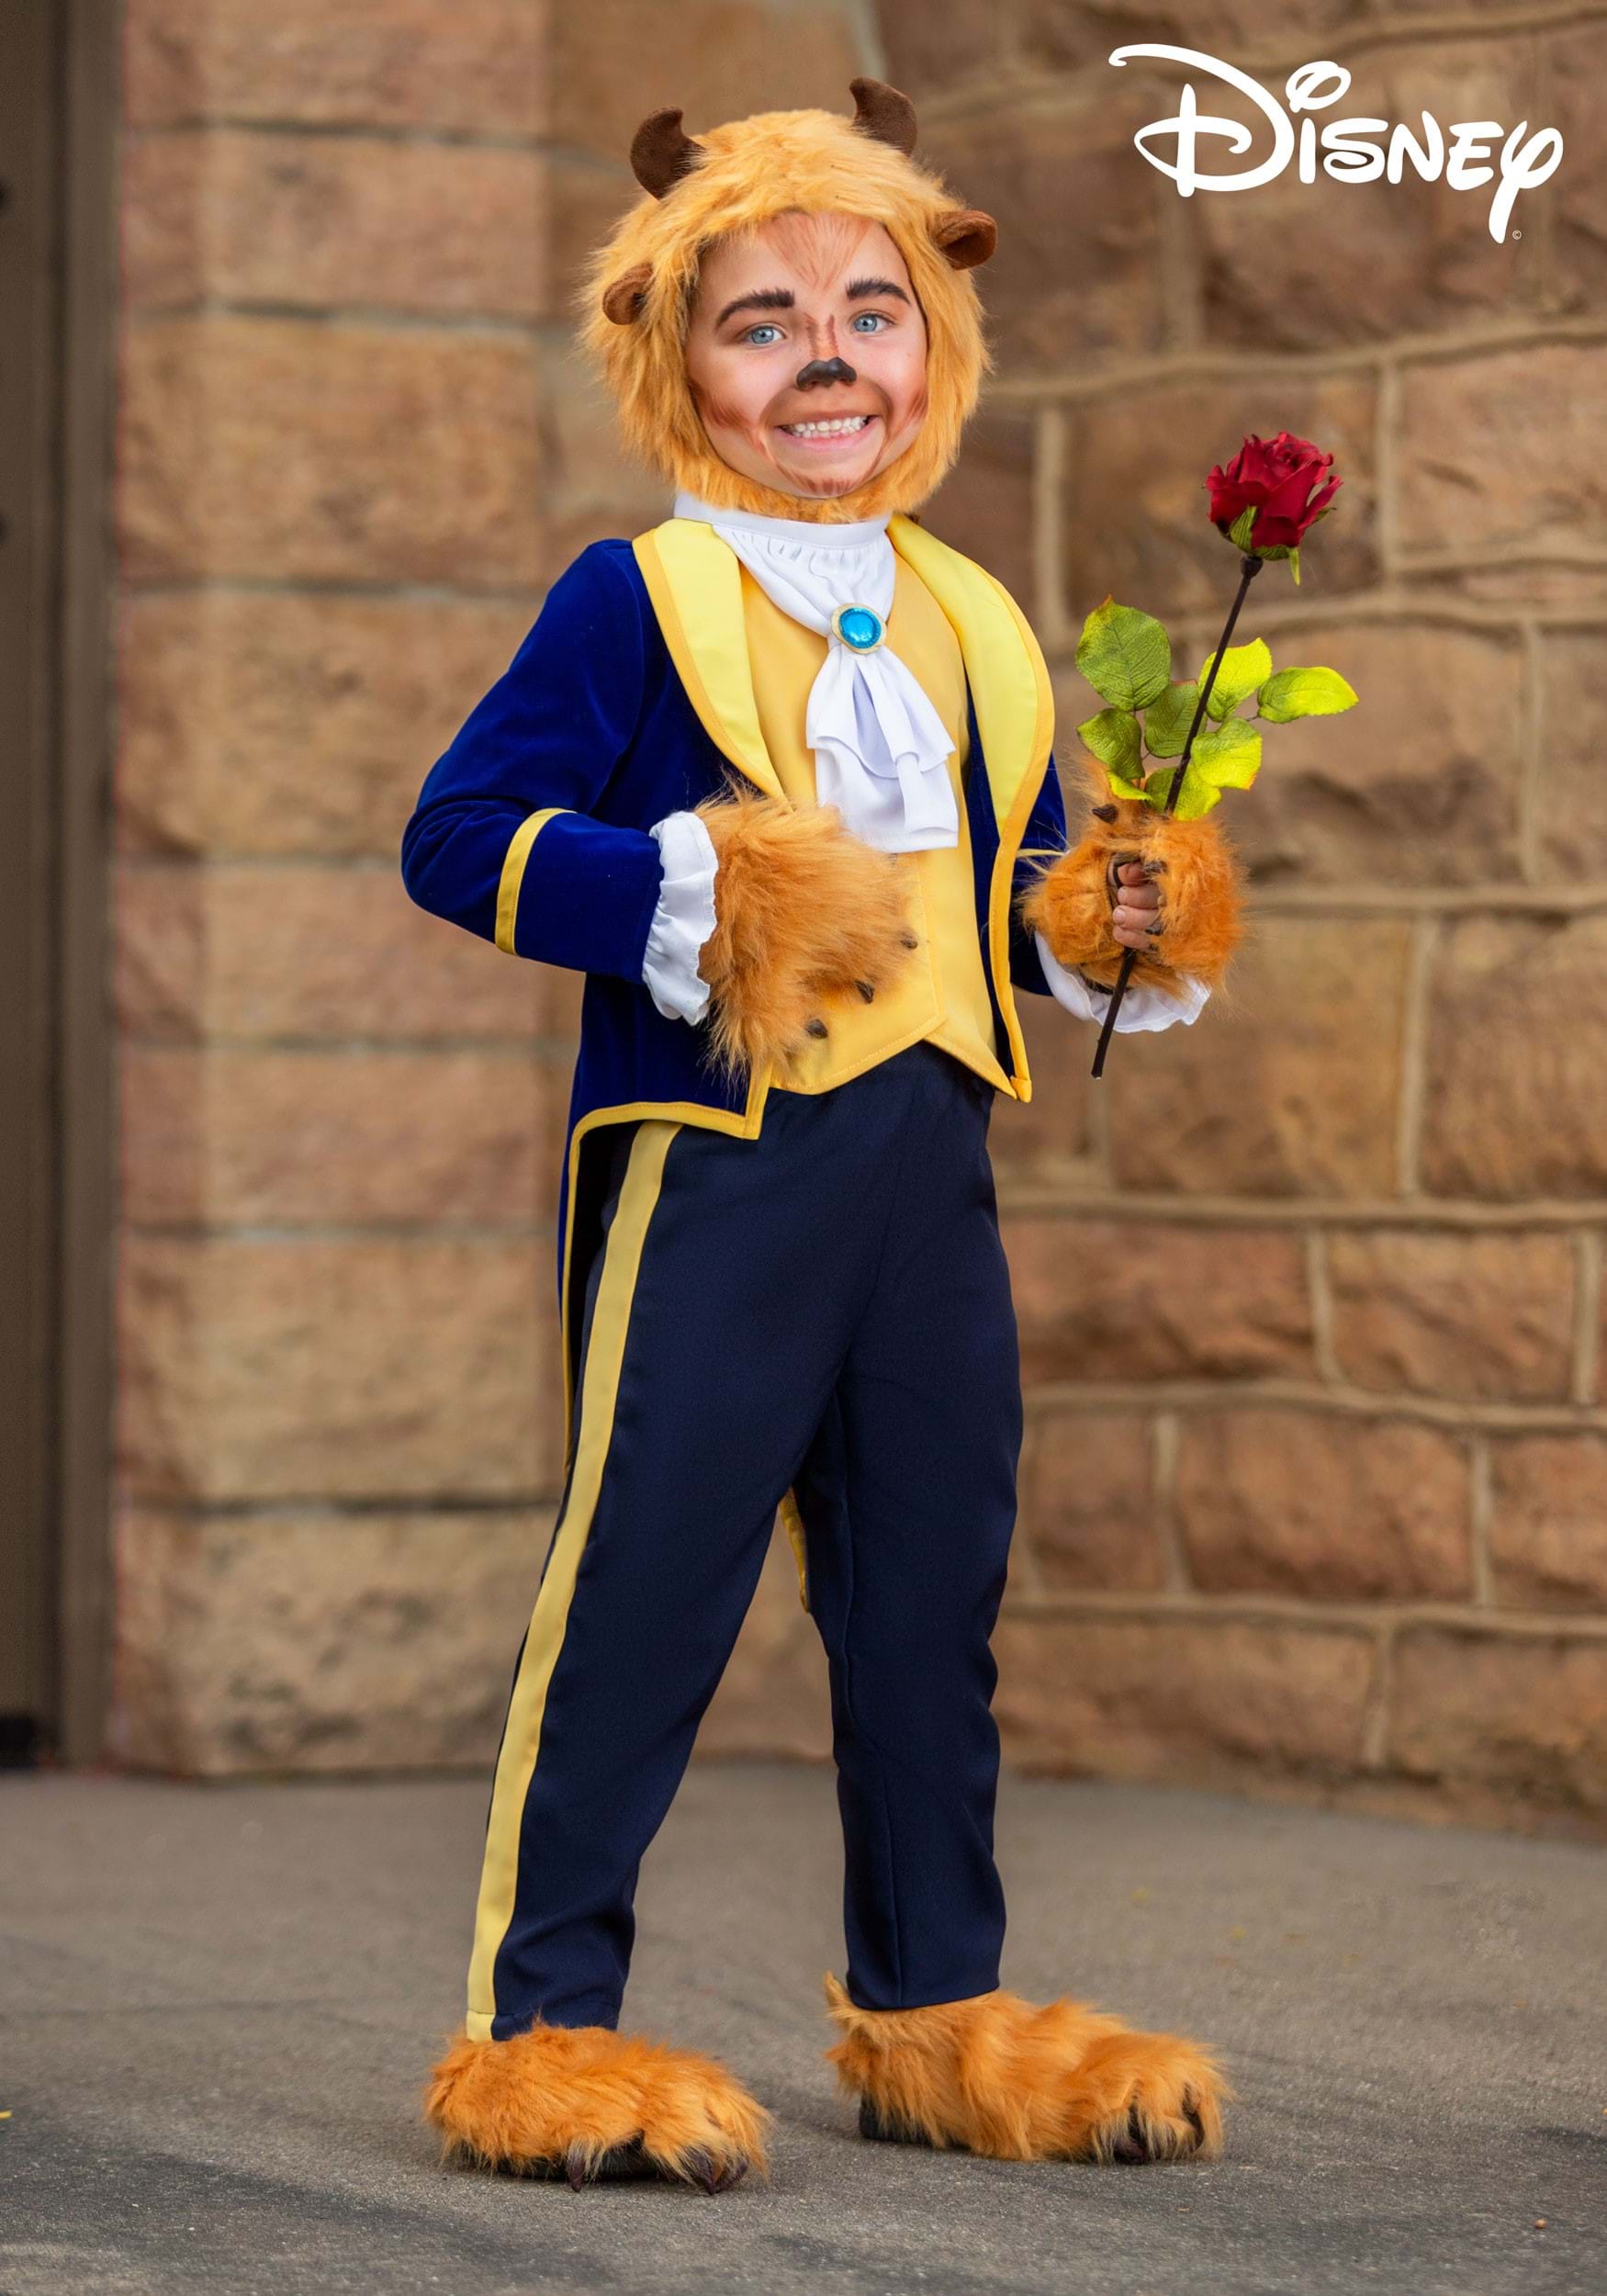 Beauty and the beast costume